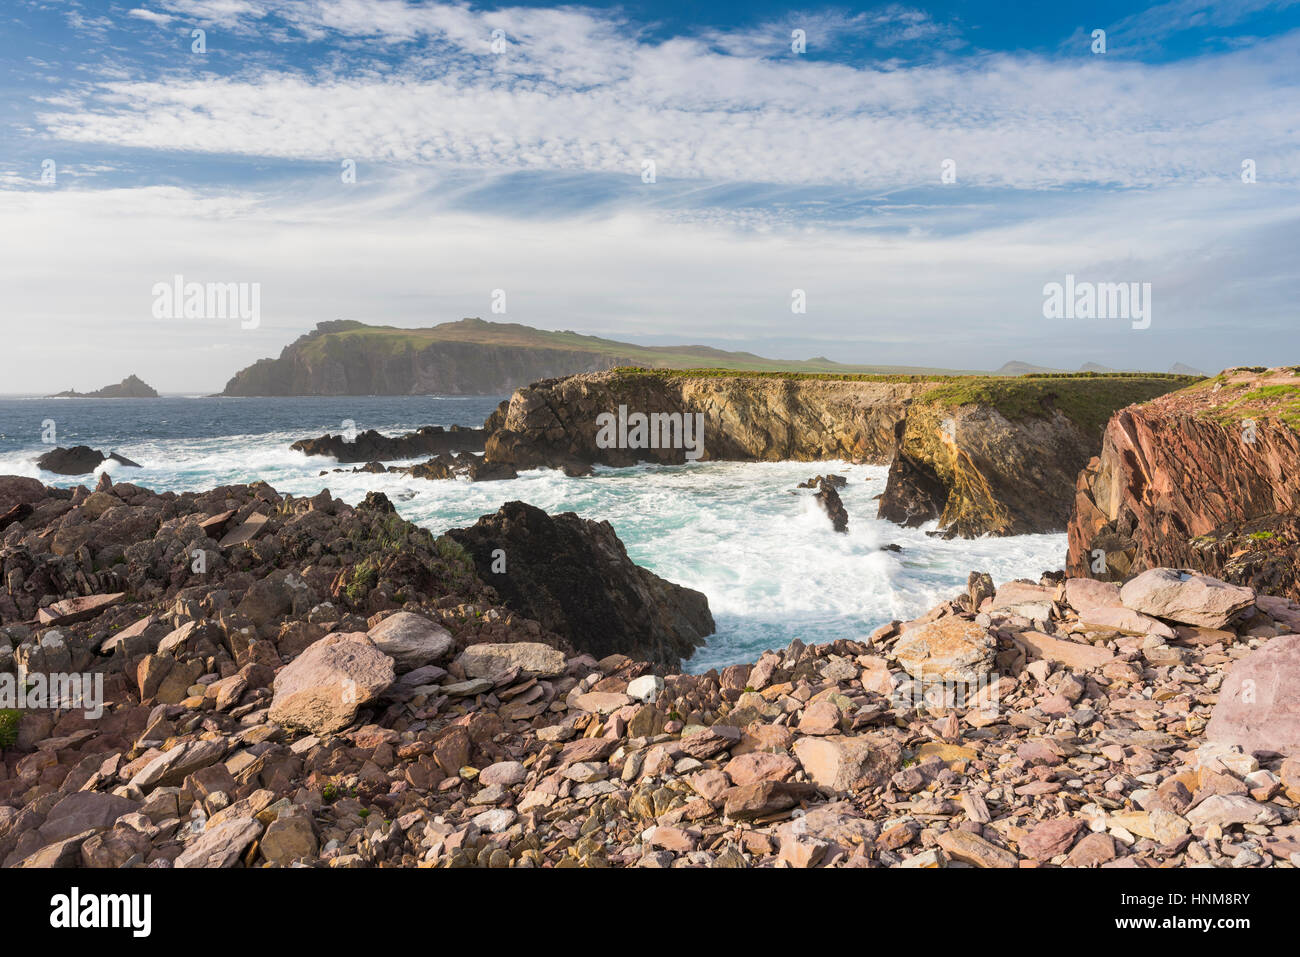 Looking towards Sybil Head across a very choppy sea with beautiful clouds, from the coastal path at Clogher, Dingle Peninsula, County Kerry, Ireland Stock Photo